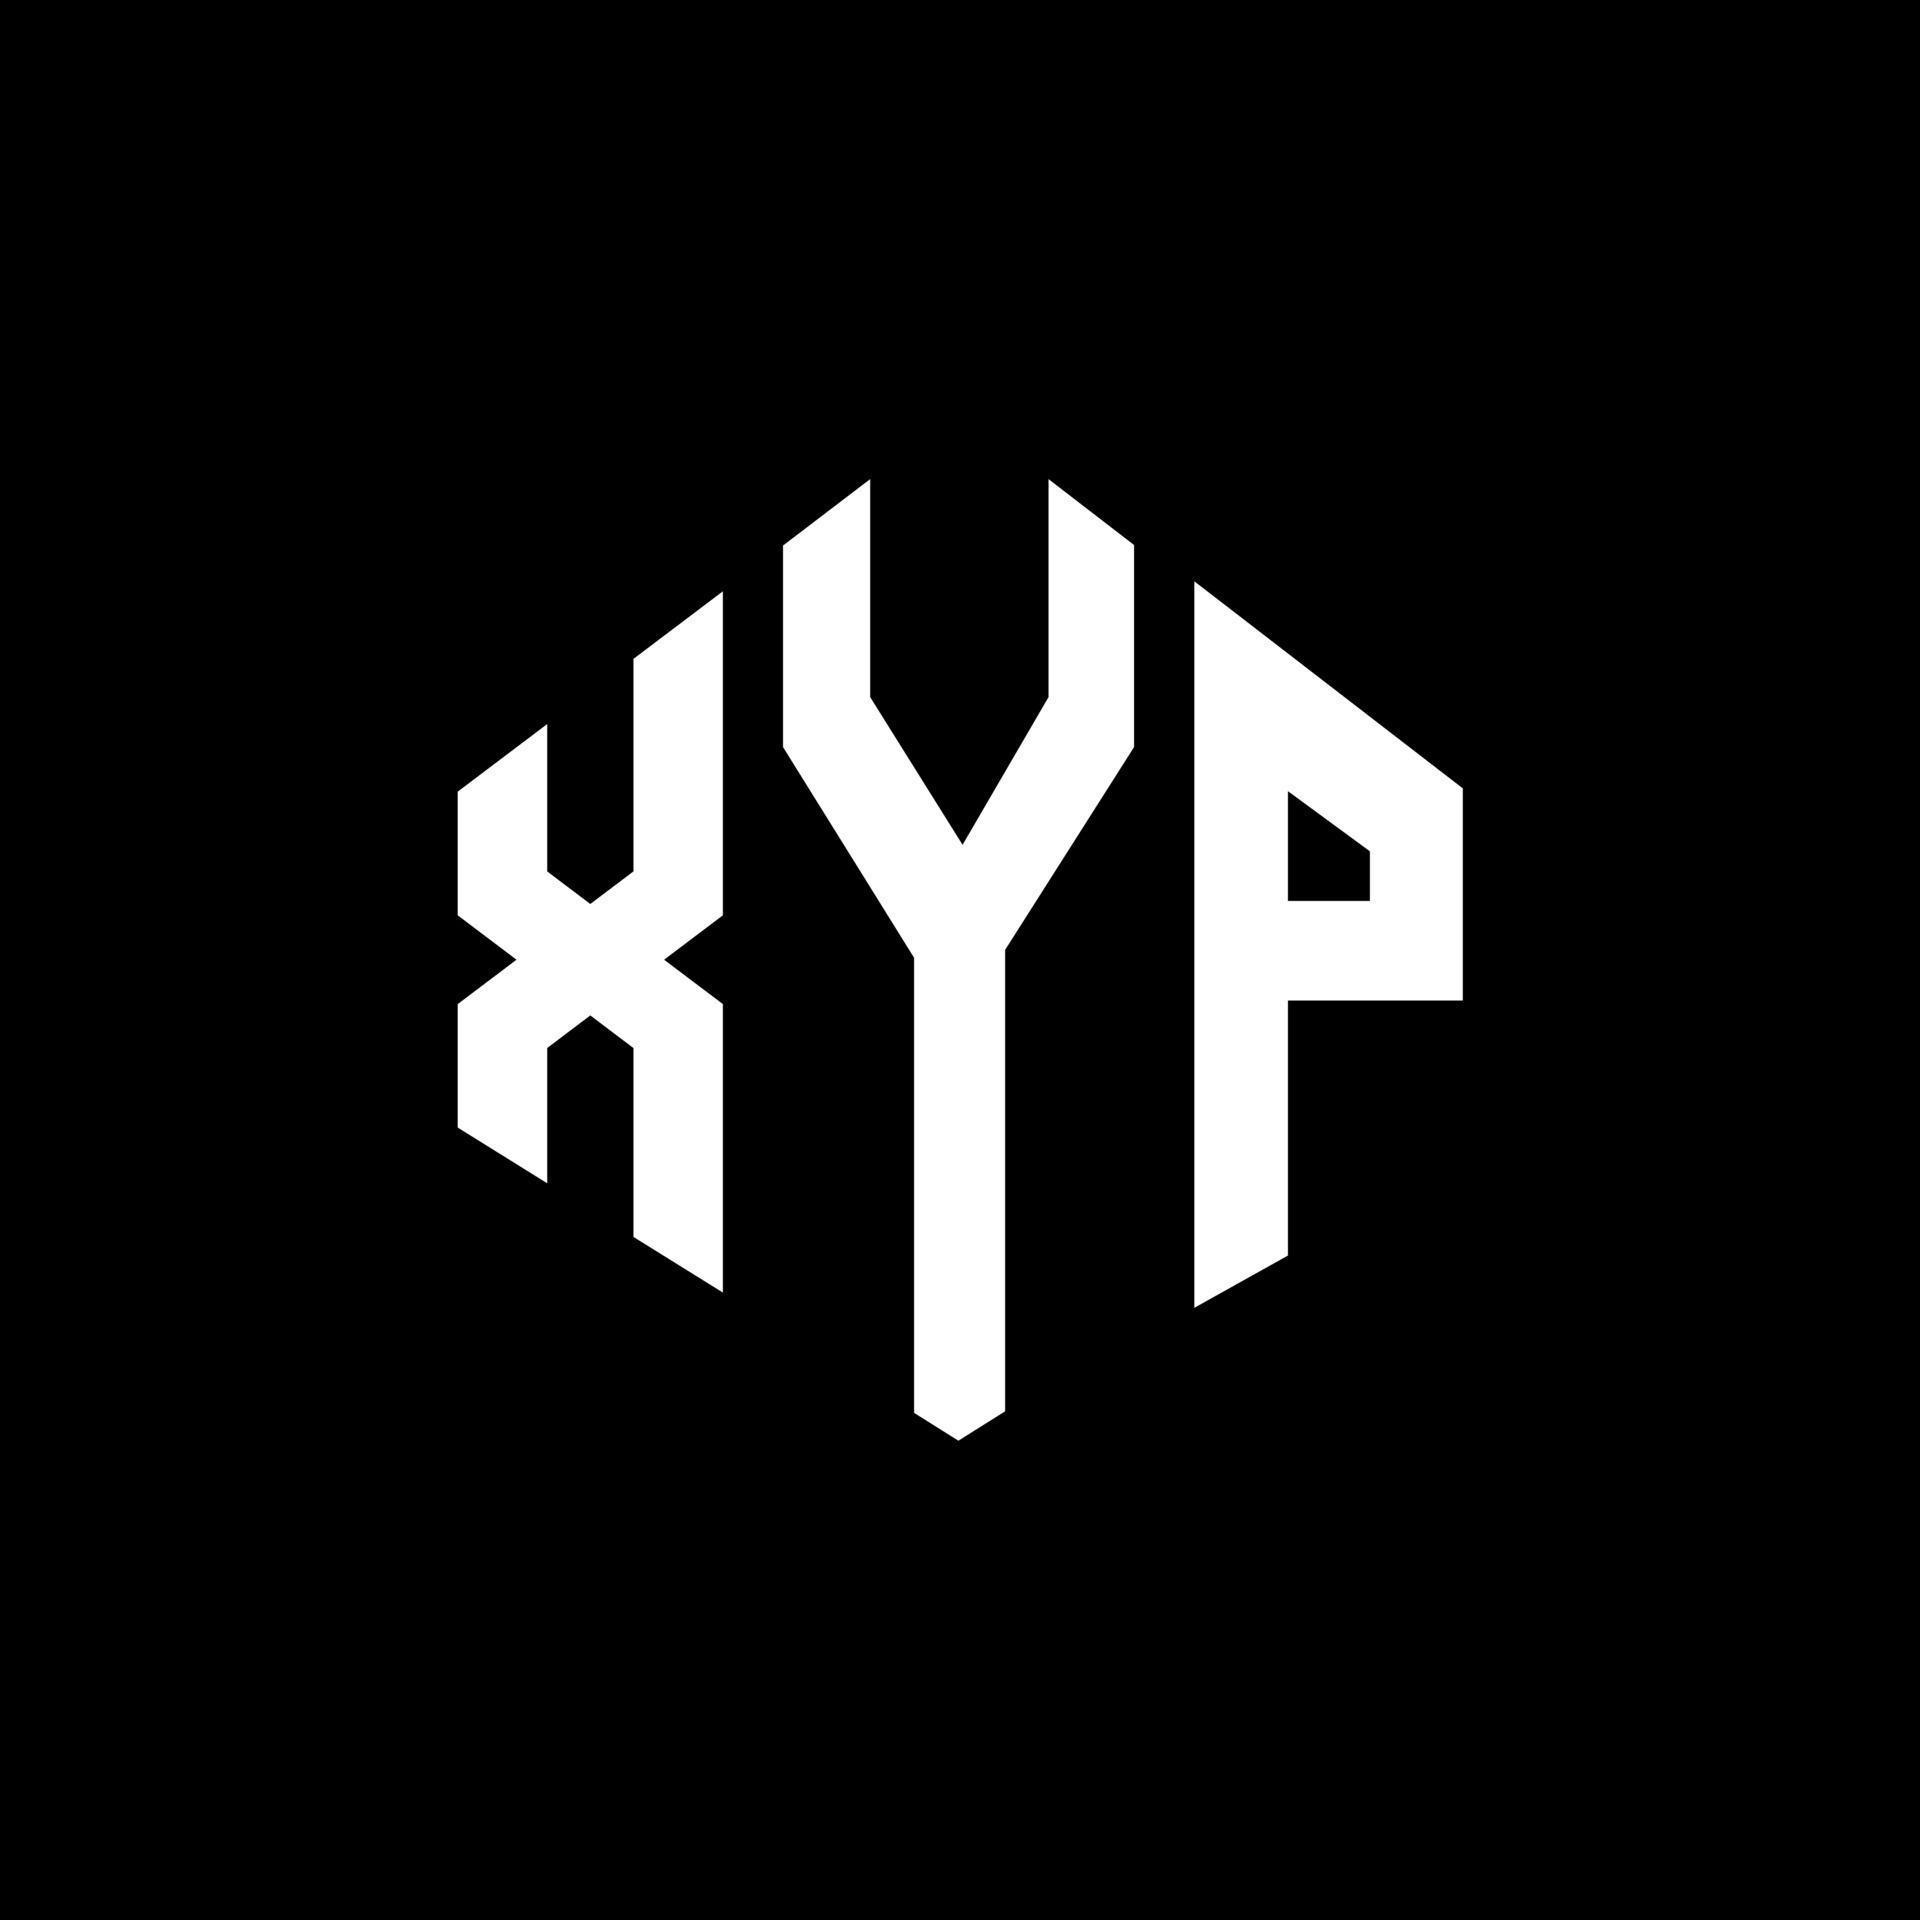 XYP letter logo design with polygon shape. XYP polygon and cube shape ...